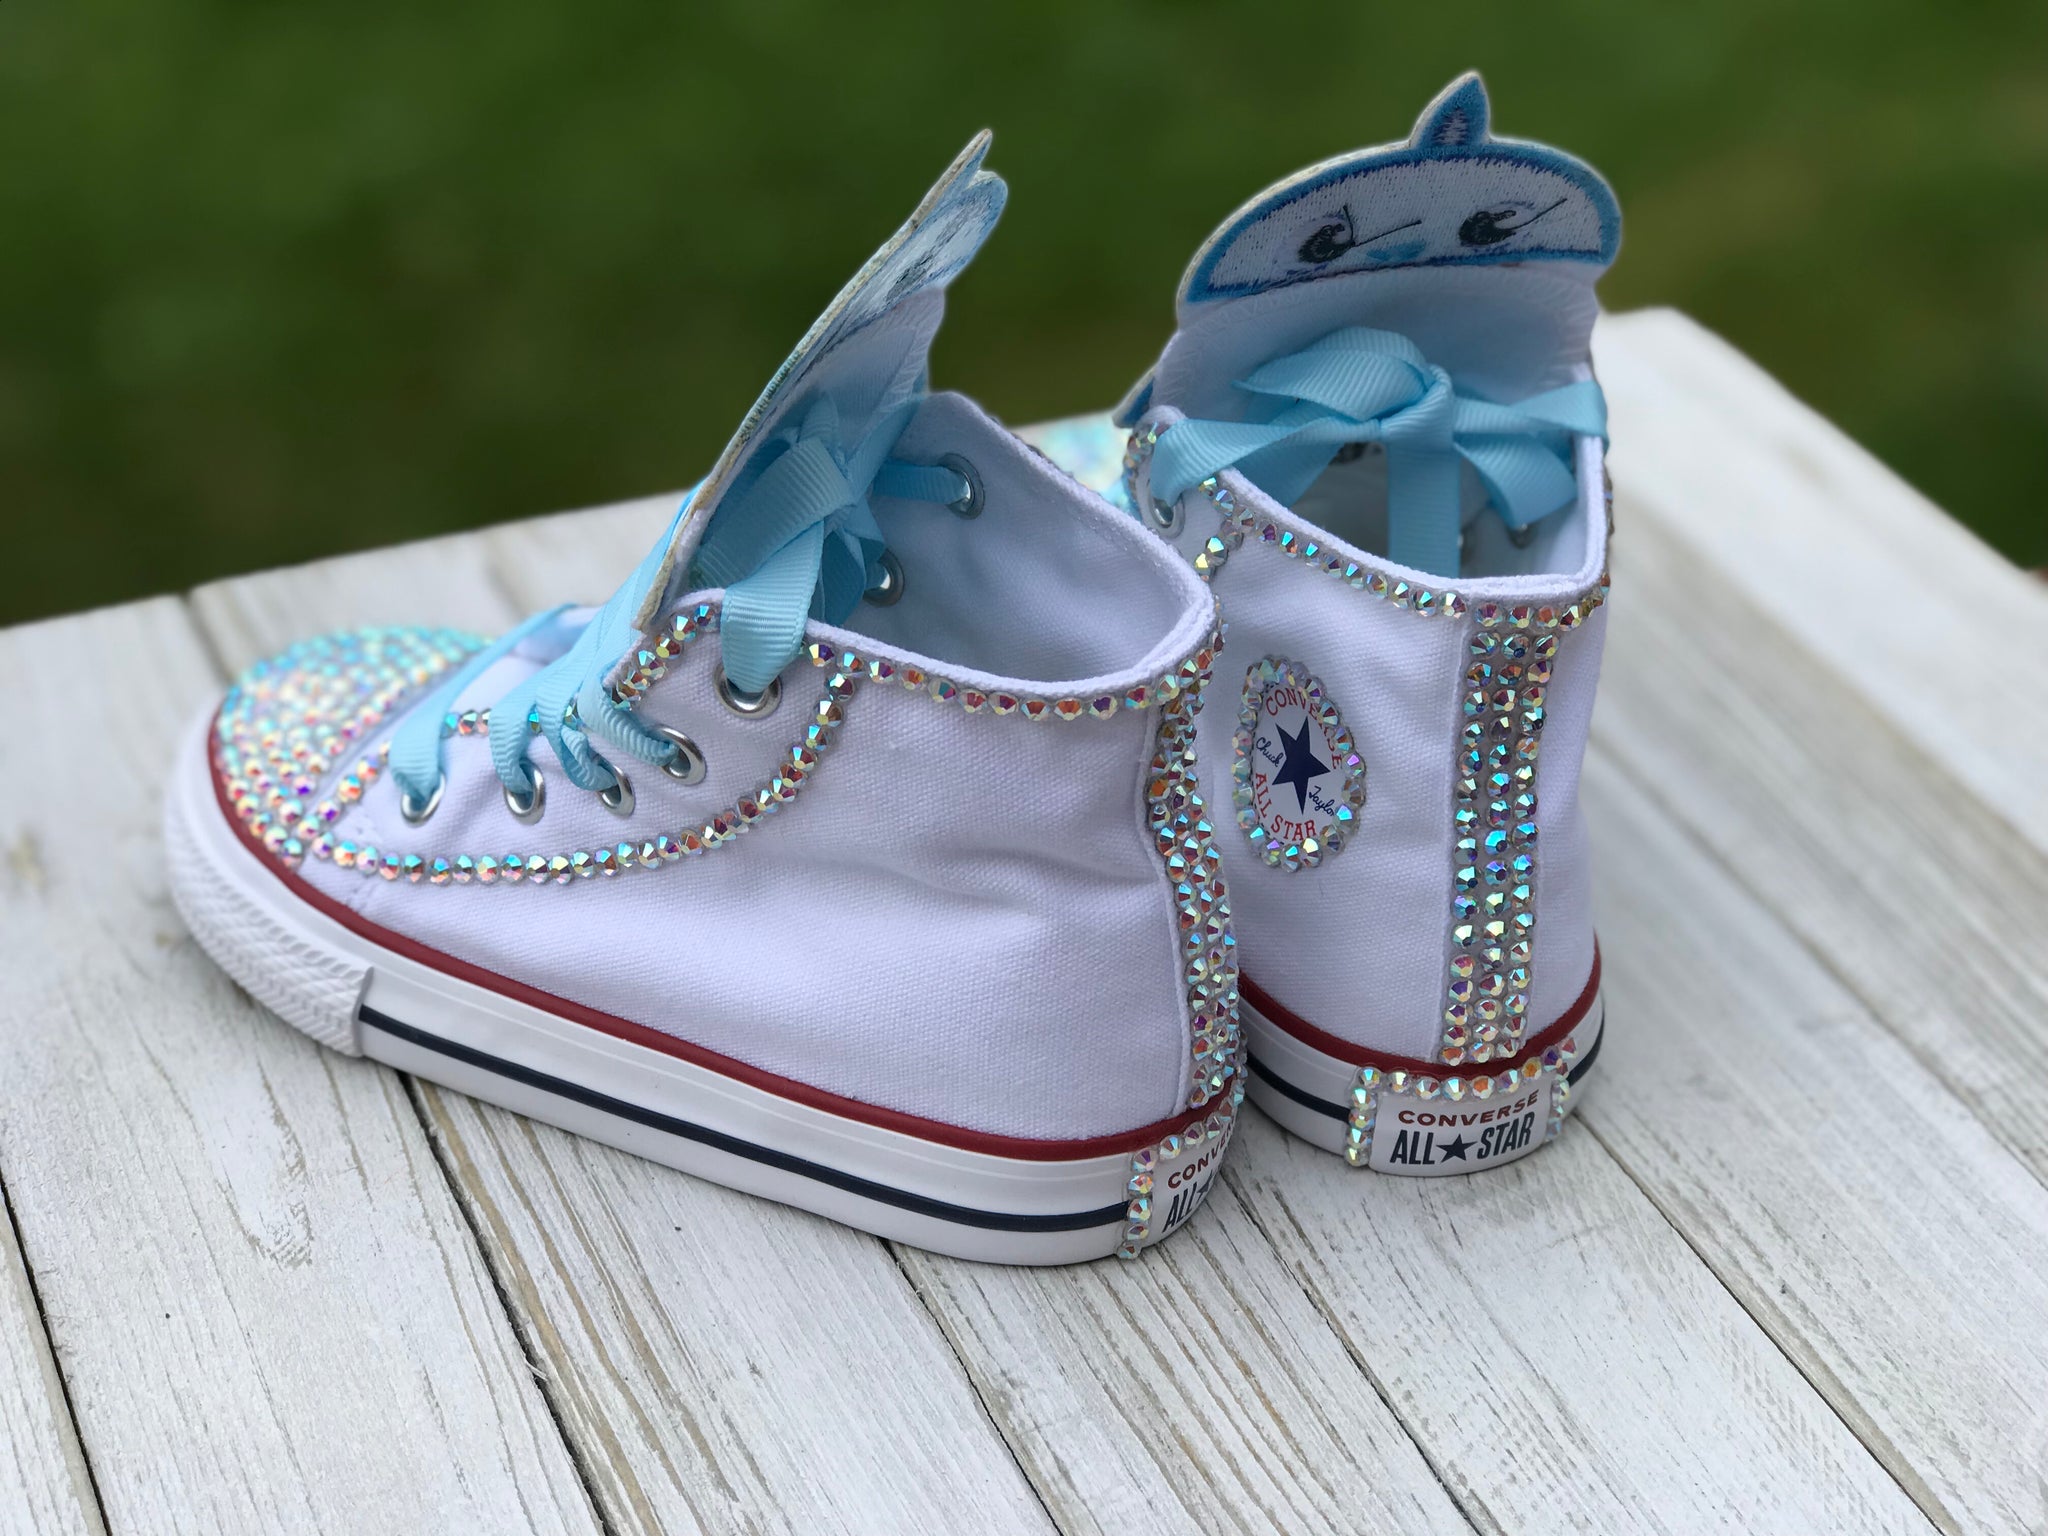 Baby Shark Shoes, Baby Shark Converse Sneakers, Little Kids Size 10C-2Y